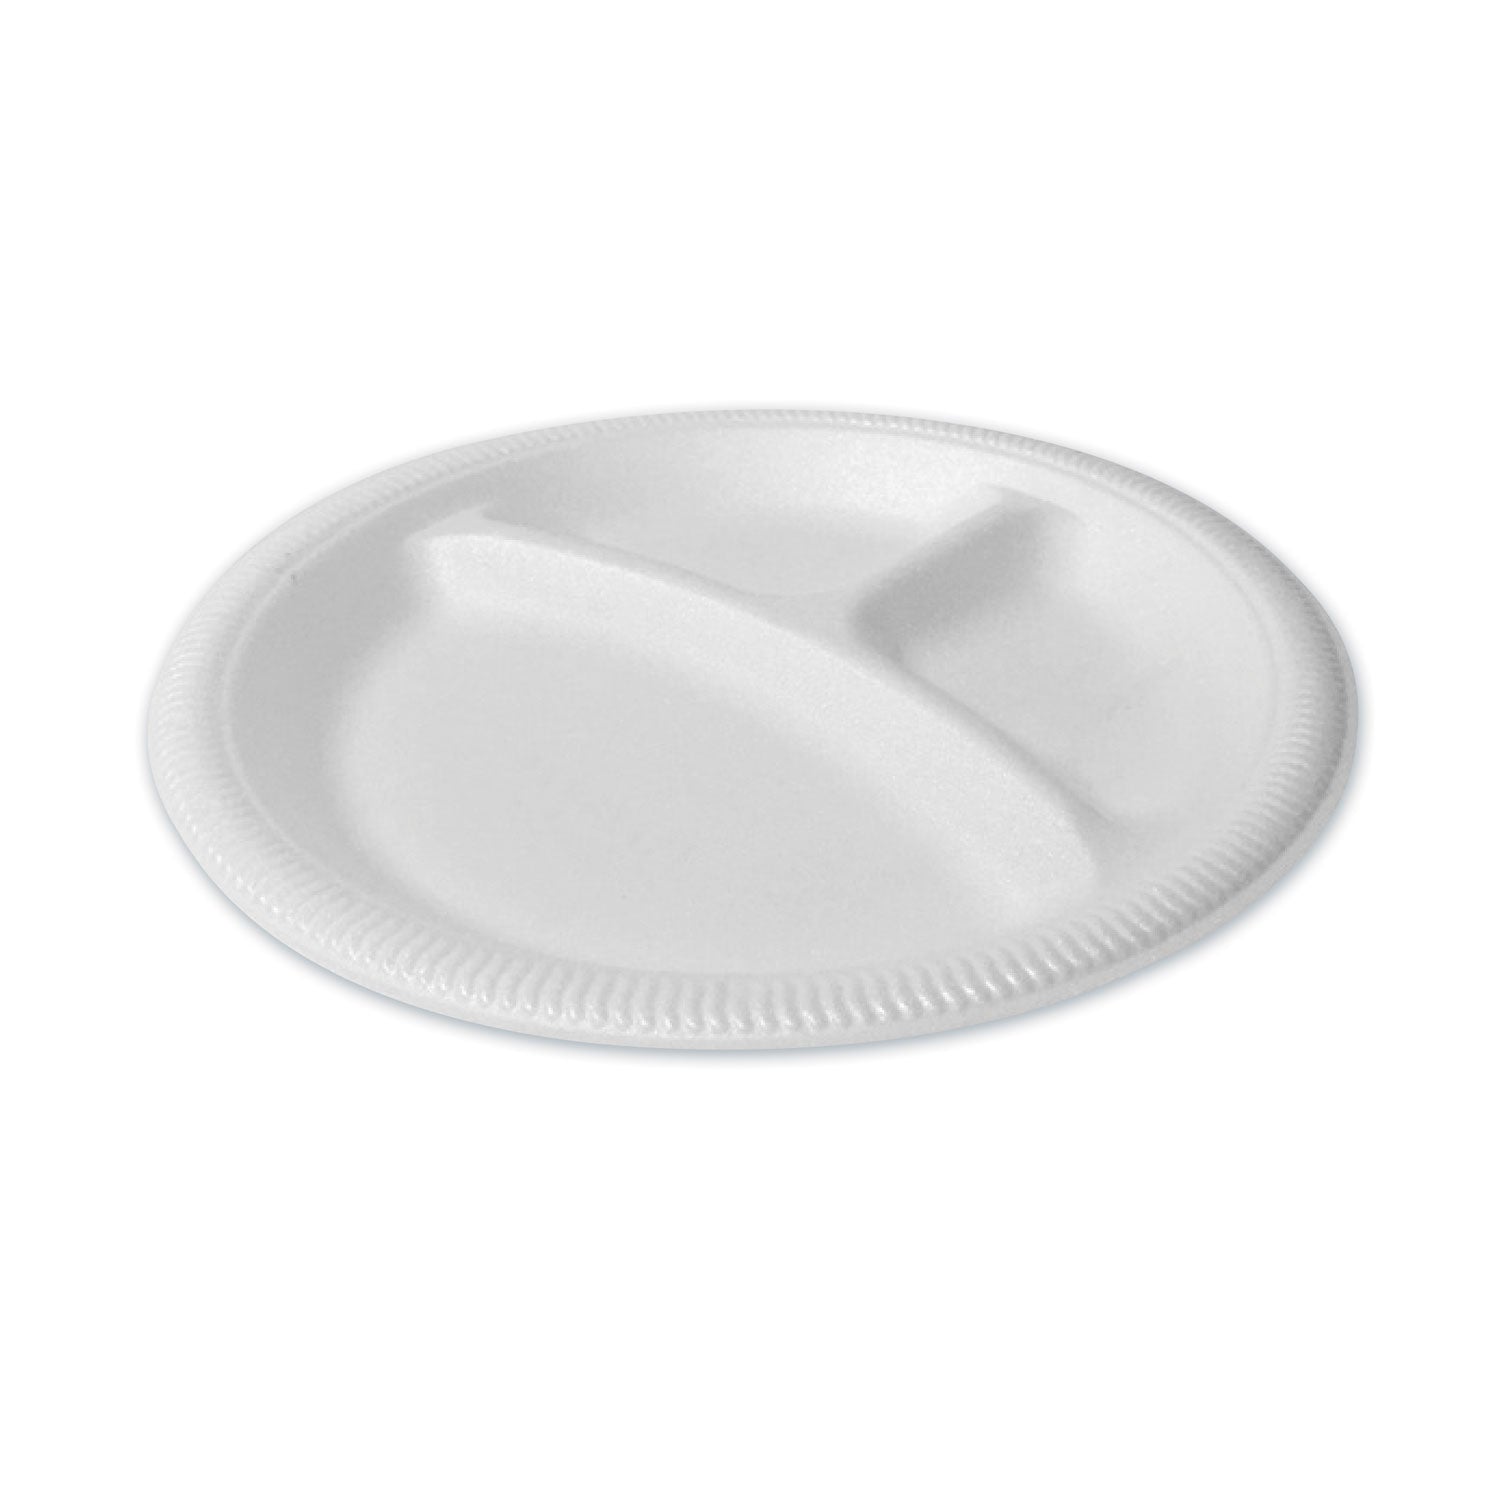 foam-dinnerware-plate-3-compartment-9-dia-poly-bag-white-125-sleeve-4-sleeves-bag-1-bag-pack_pst12201 - 1